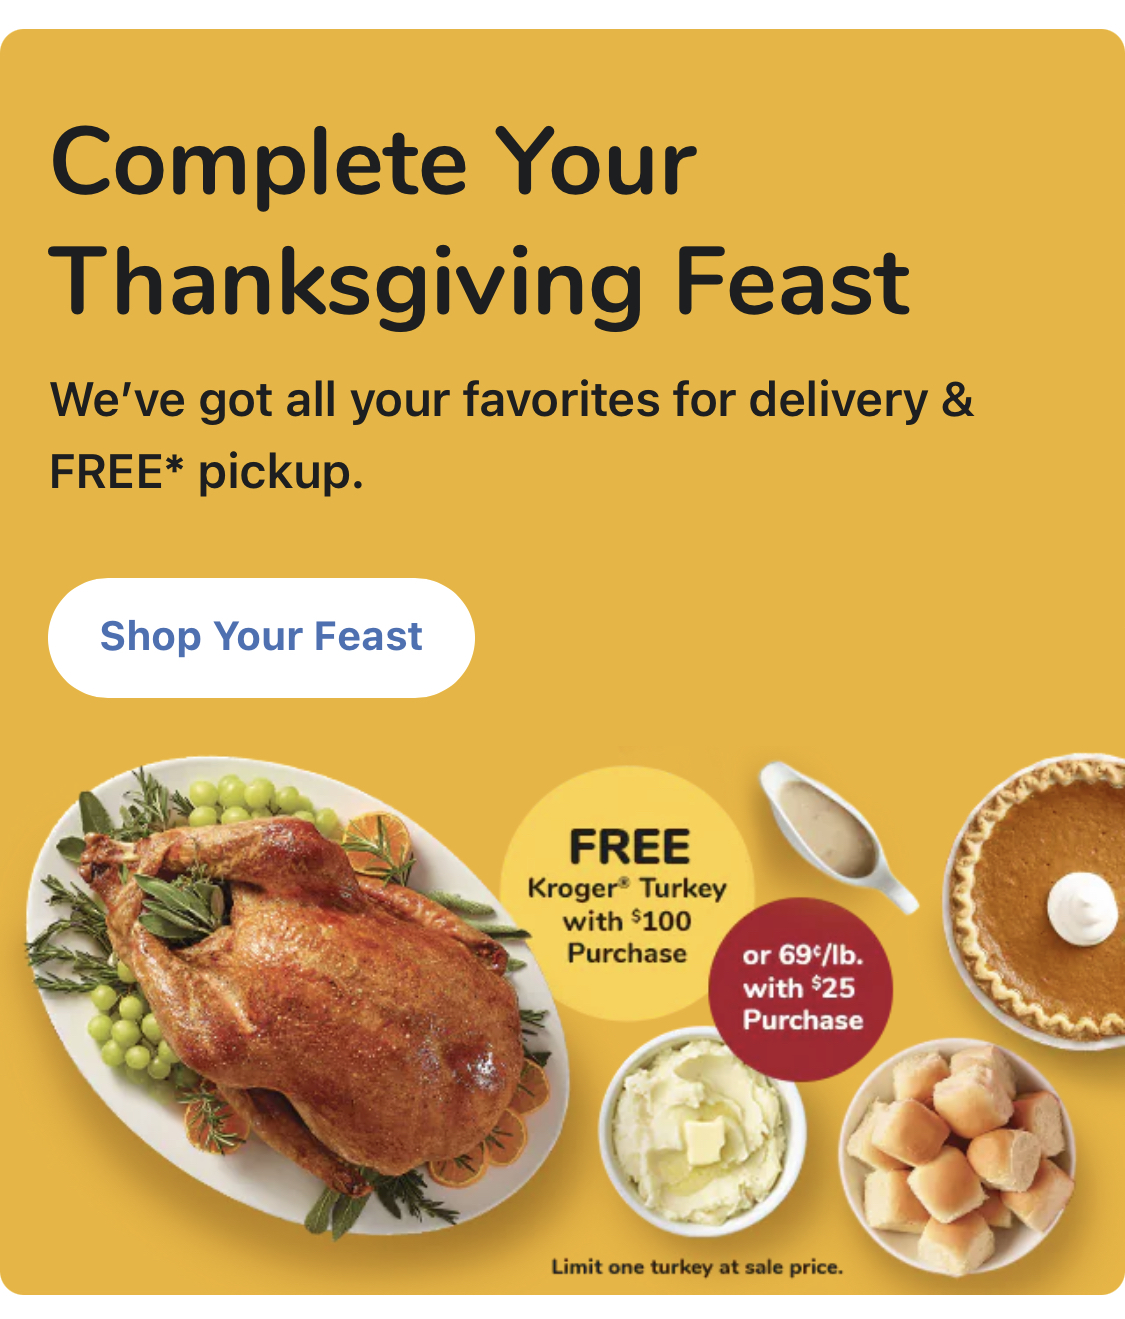 Kroger : NowDelivery $10 OFF $20 W/Promo Code TDAYRUSH10. Or In-Store Offer For Free ‘Kroger Brand’ Turkey W/ $100 Dollar Purchase